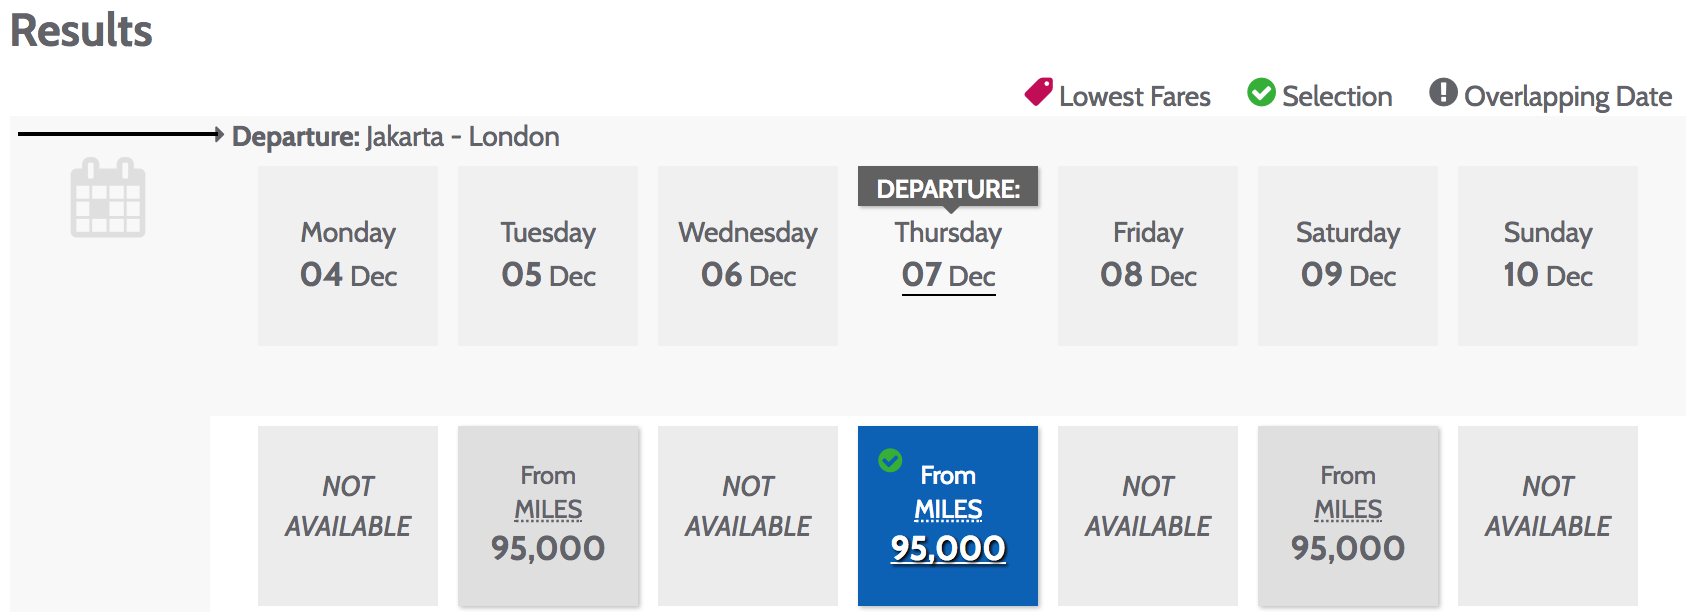  First class awards on Garuda Indonesia usually cost 180,000 Garuda Miles (or Citi ThankYou Points) for a flight between London (LHR) and Jakarta (CGK), but the promo rate is 95,000 miles. 